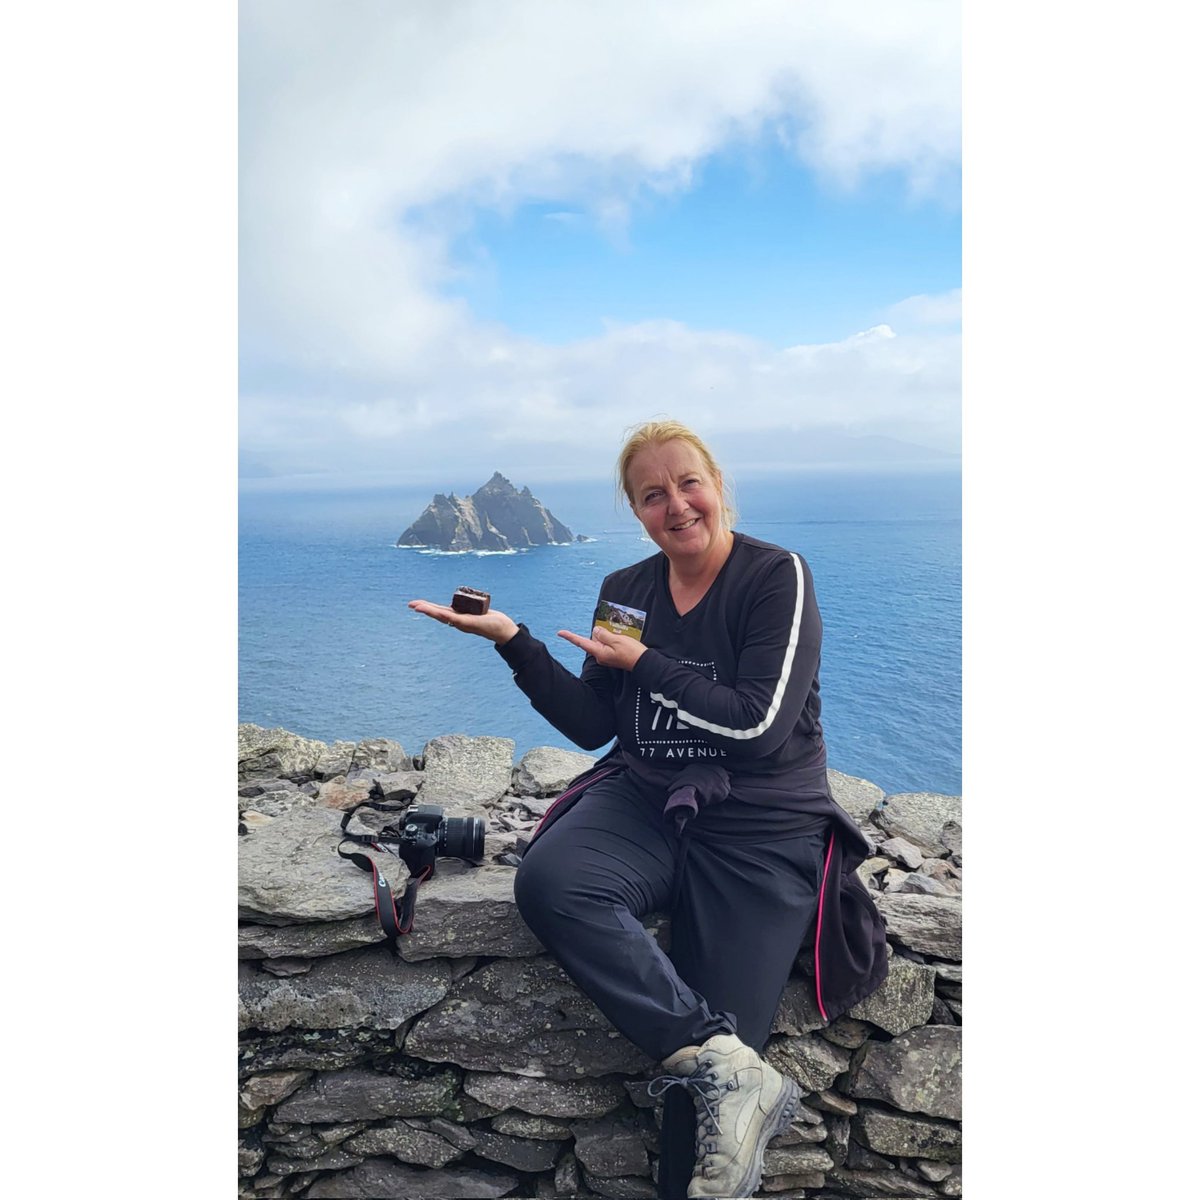 Another piece of Jen's delicious Chocolate cake just before it was devoured on Skellig Michael today.

#valhallabnb #bedandbreakfast #skelligmichael #chocolatecake